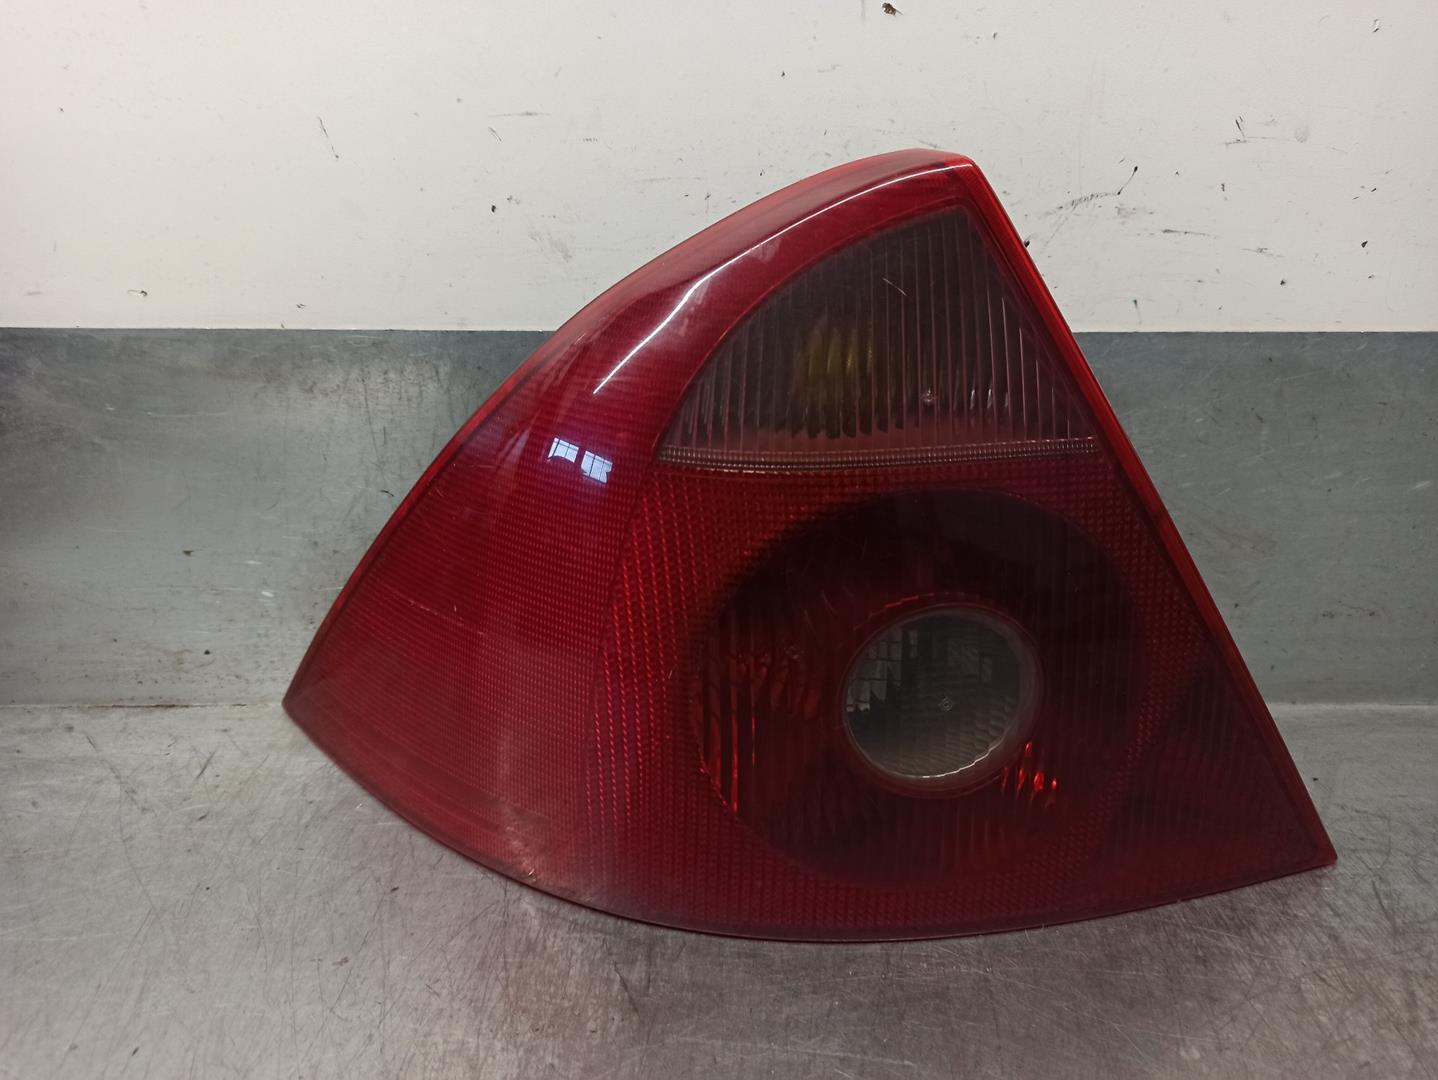 FORD Mondeo 3 generation (2000-2007) Rear Left Taillight 1S7113405A, 4PUERTAS 19848857